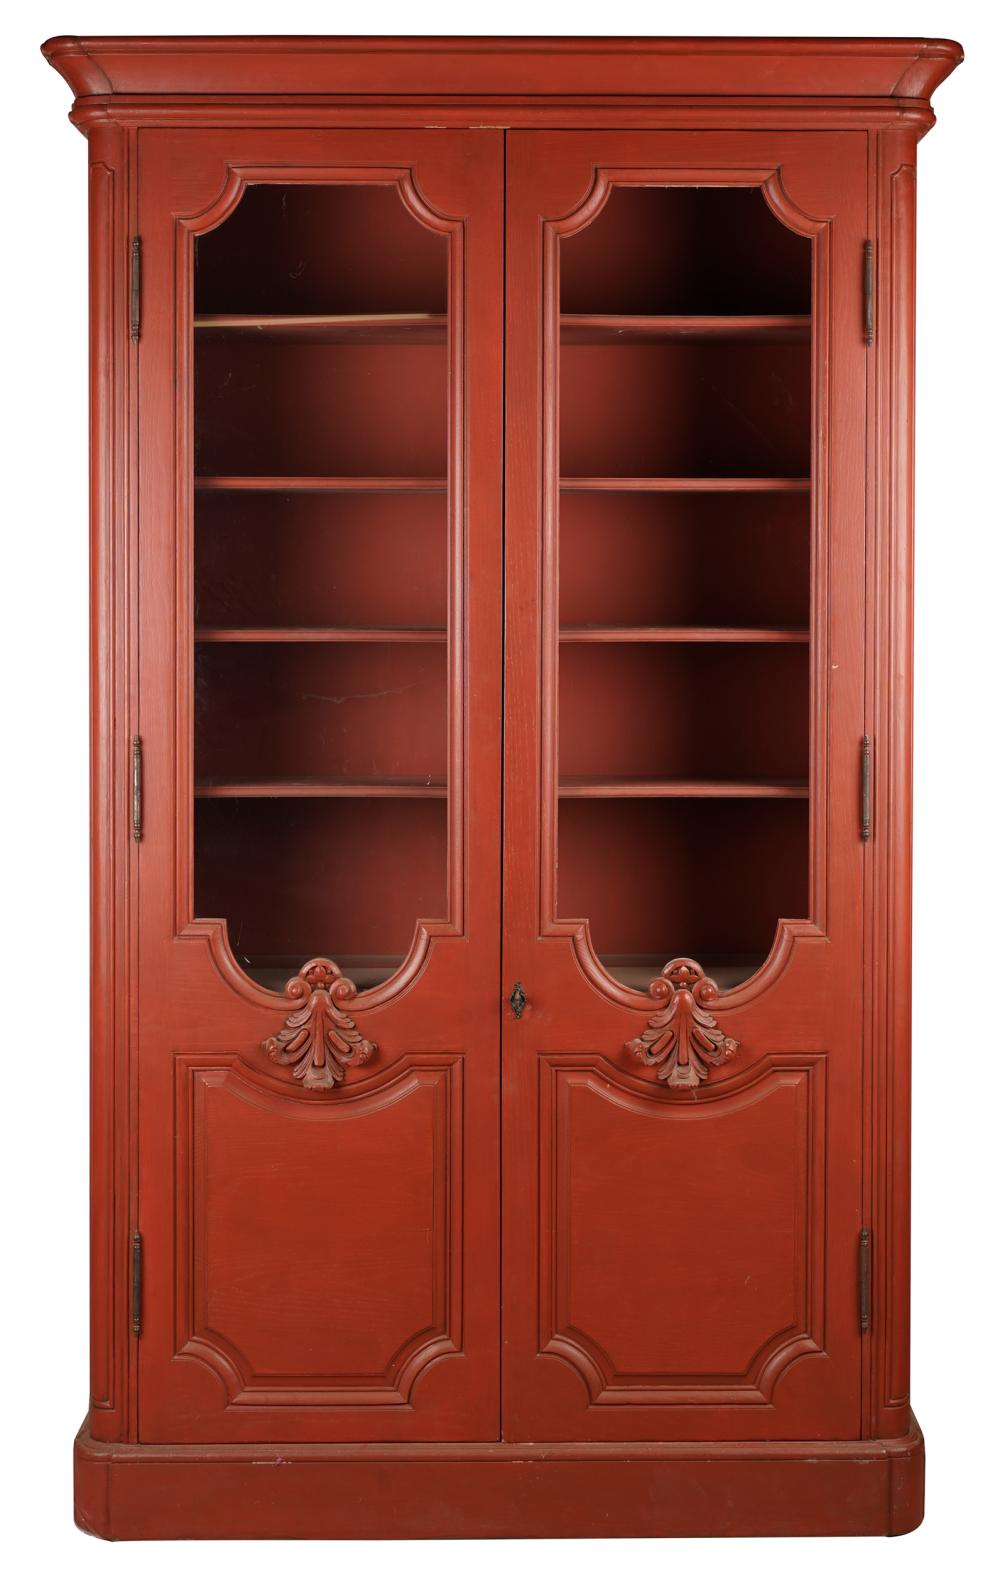 FRENCH PROVINCIAL-STYLE RED-PAINTED